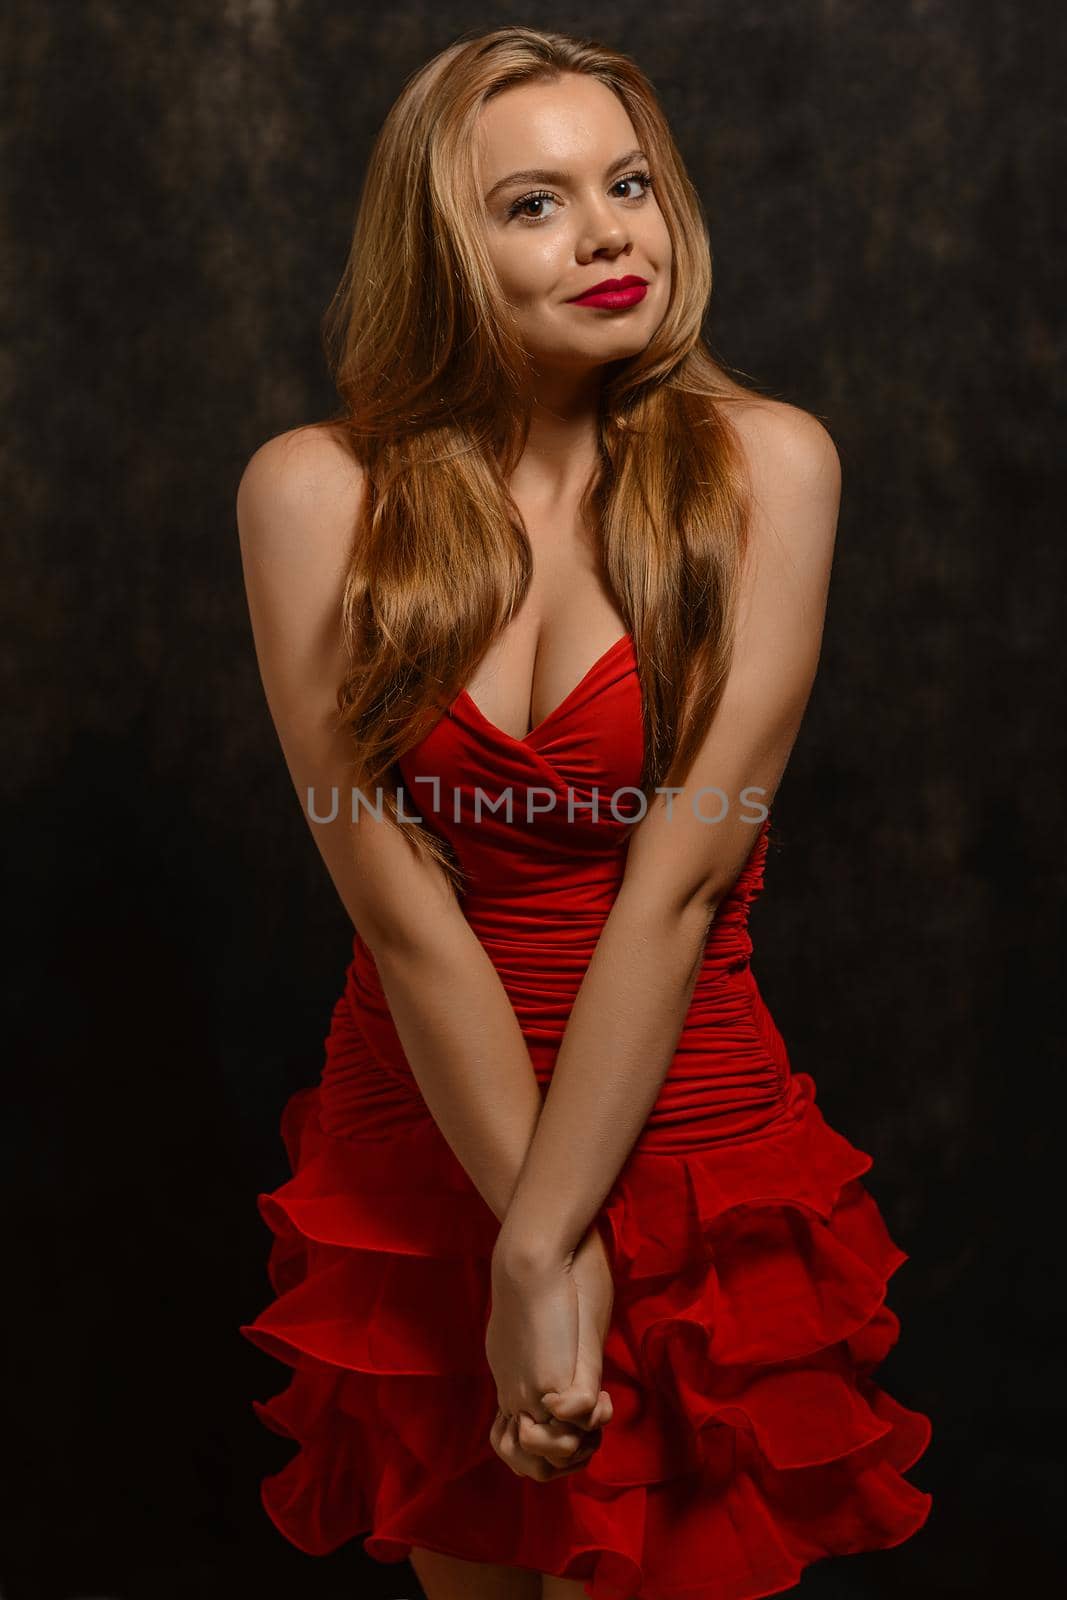 Beautiful blond woman in elegant red dress. Professional makeup and hairstyle